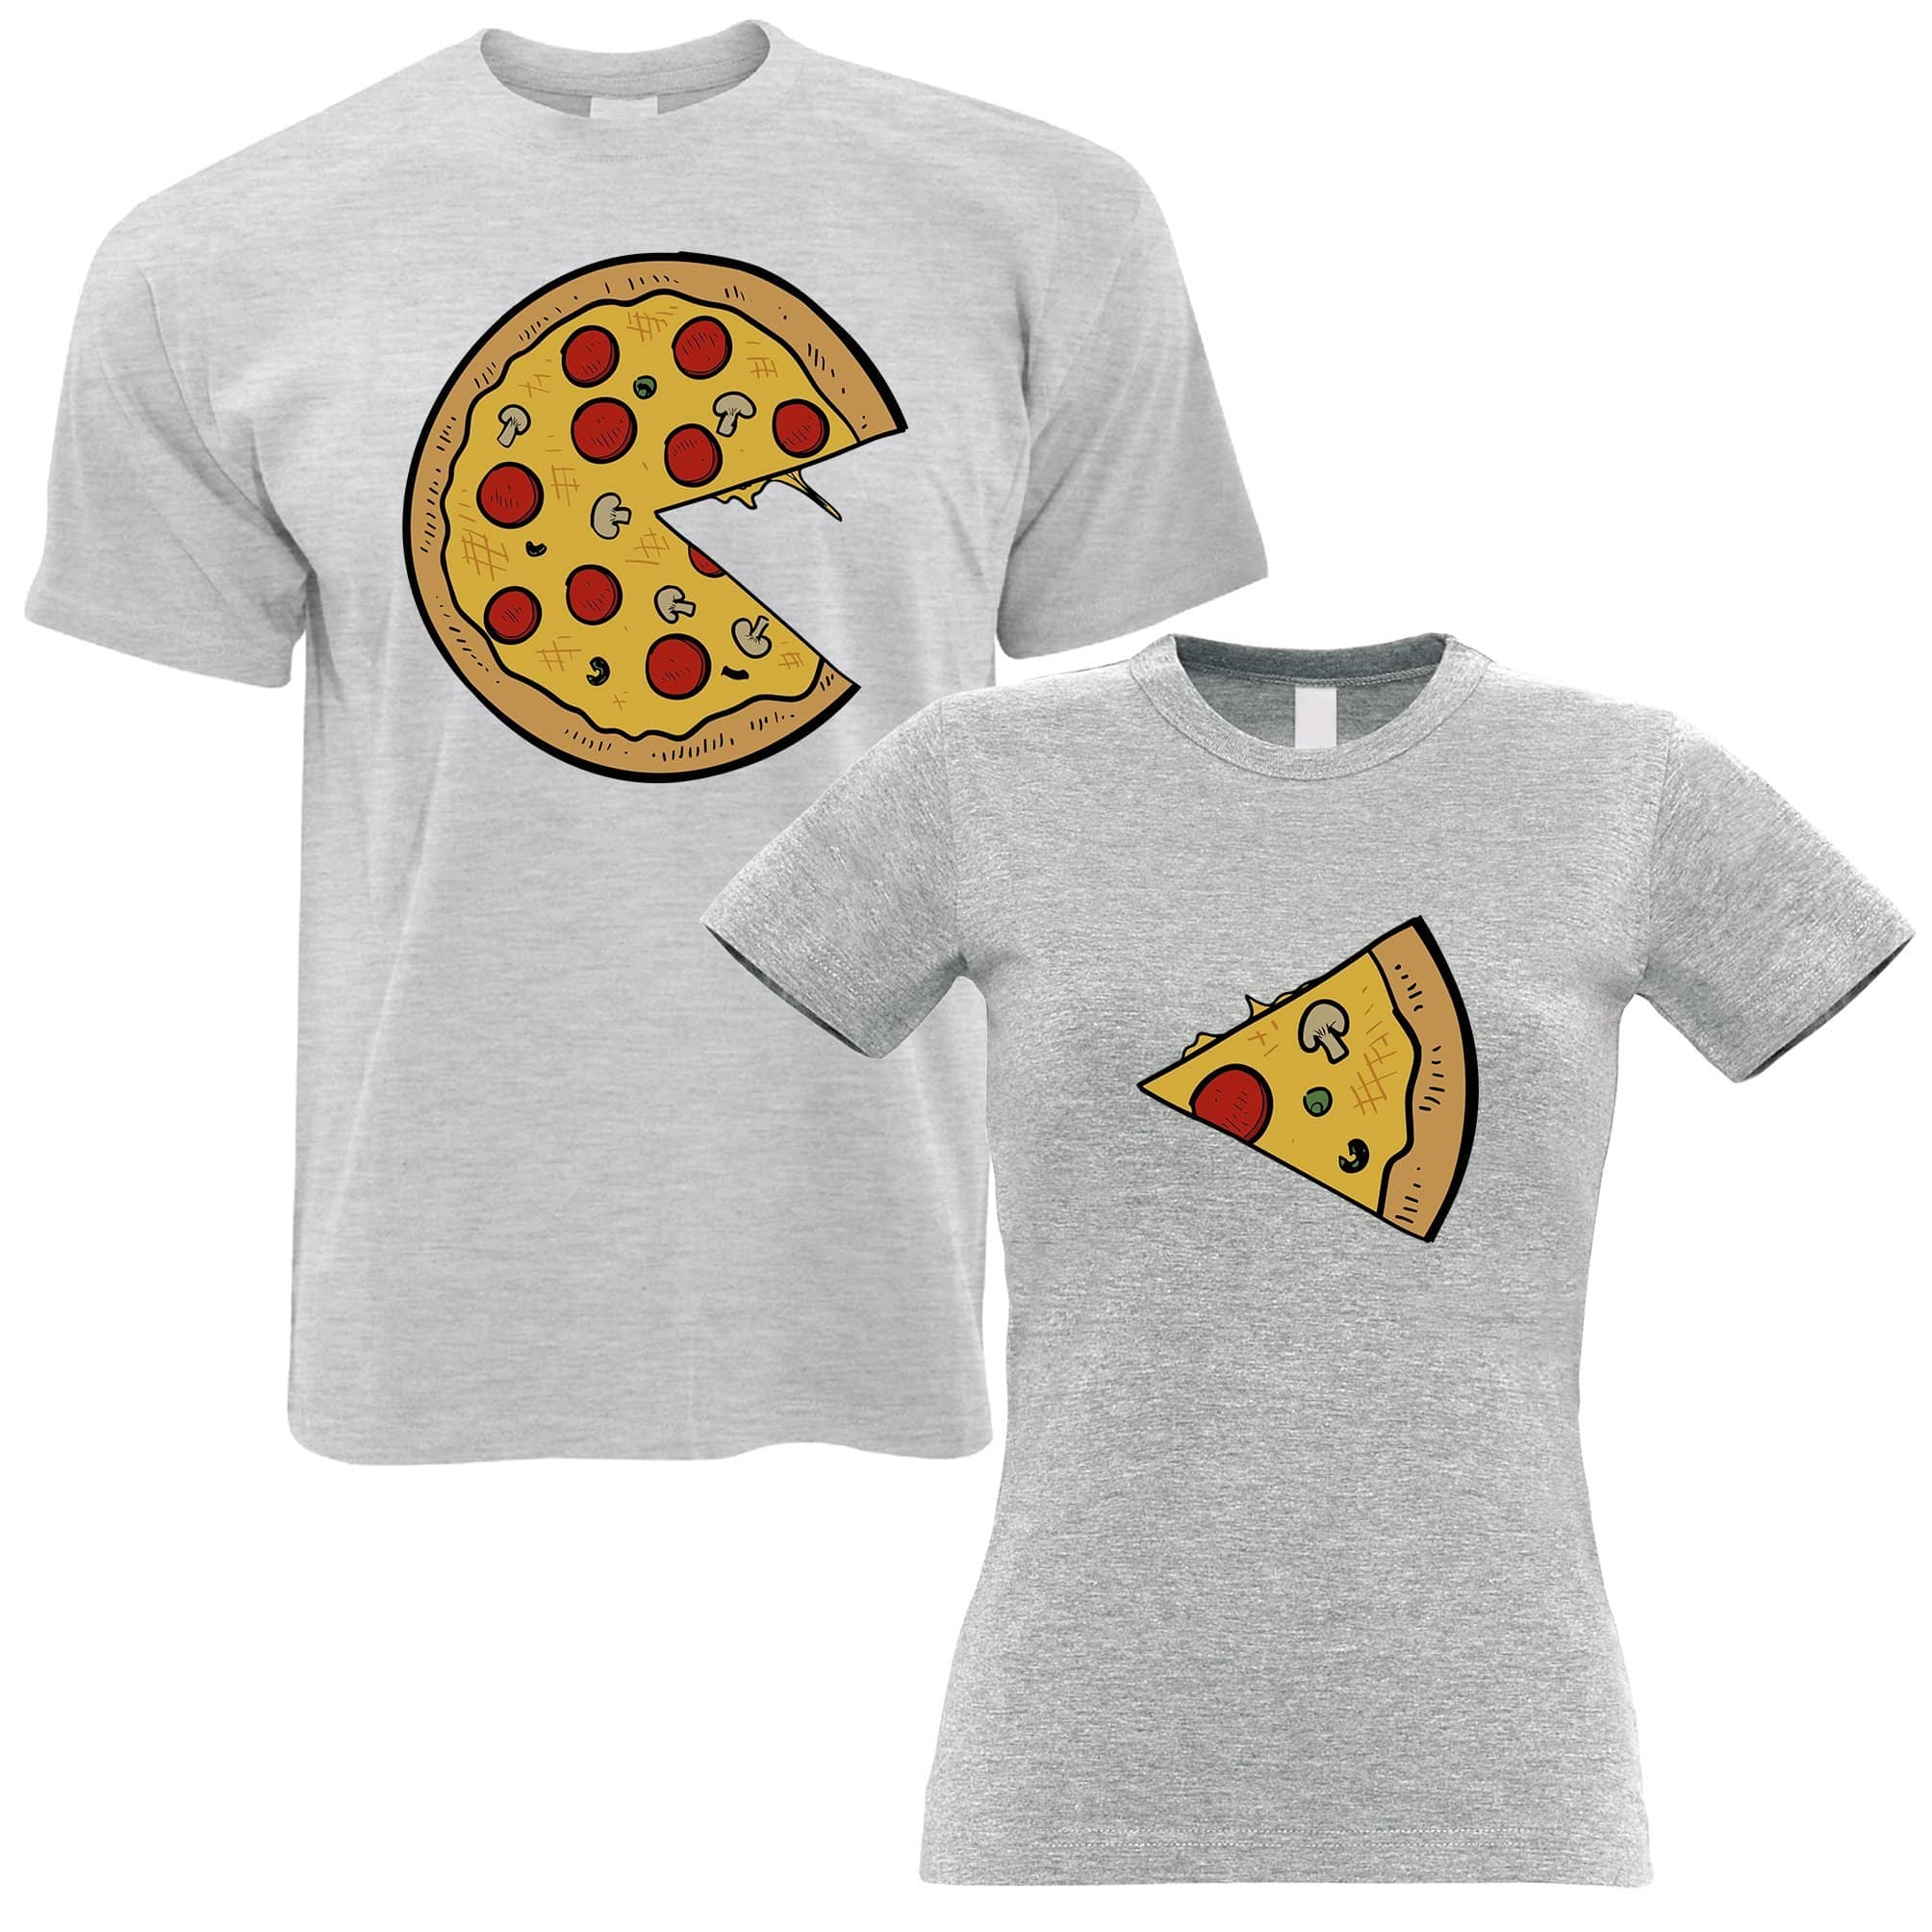 Couples Pack Of 2 T Shirts Cute Pizza Slice Boyfriend Girlfriend His Hers Shirtbox